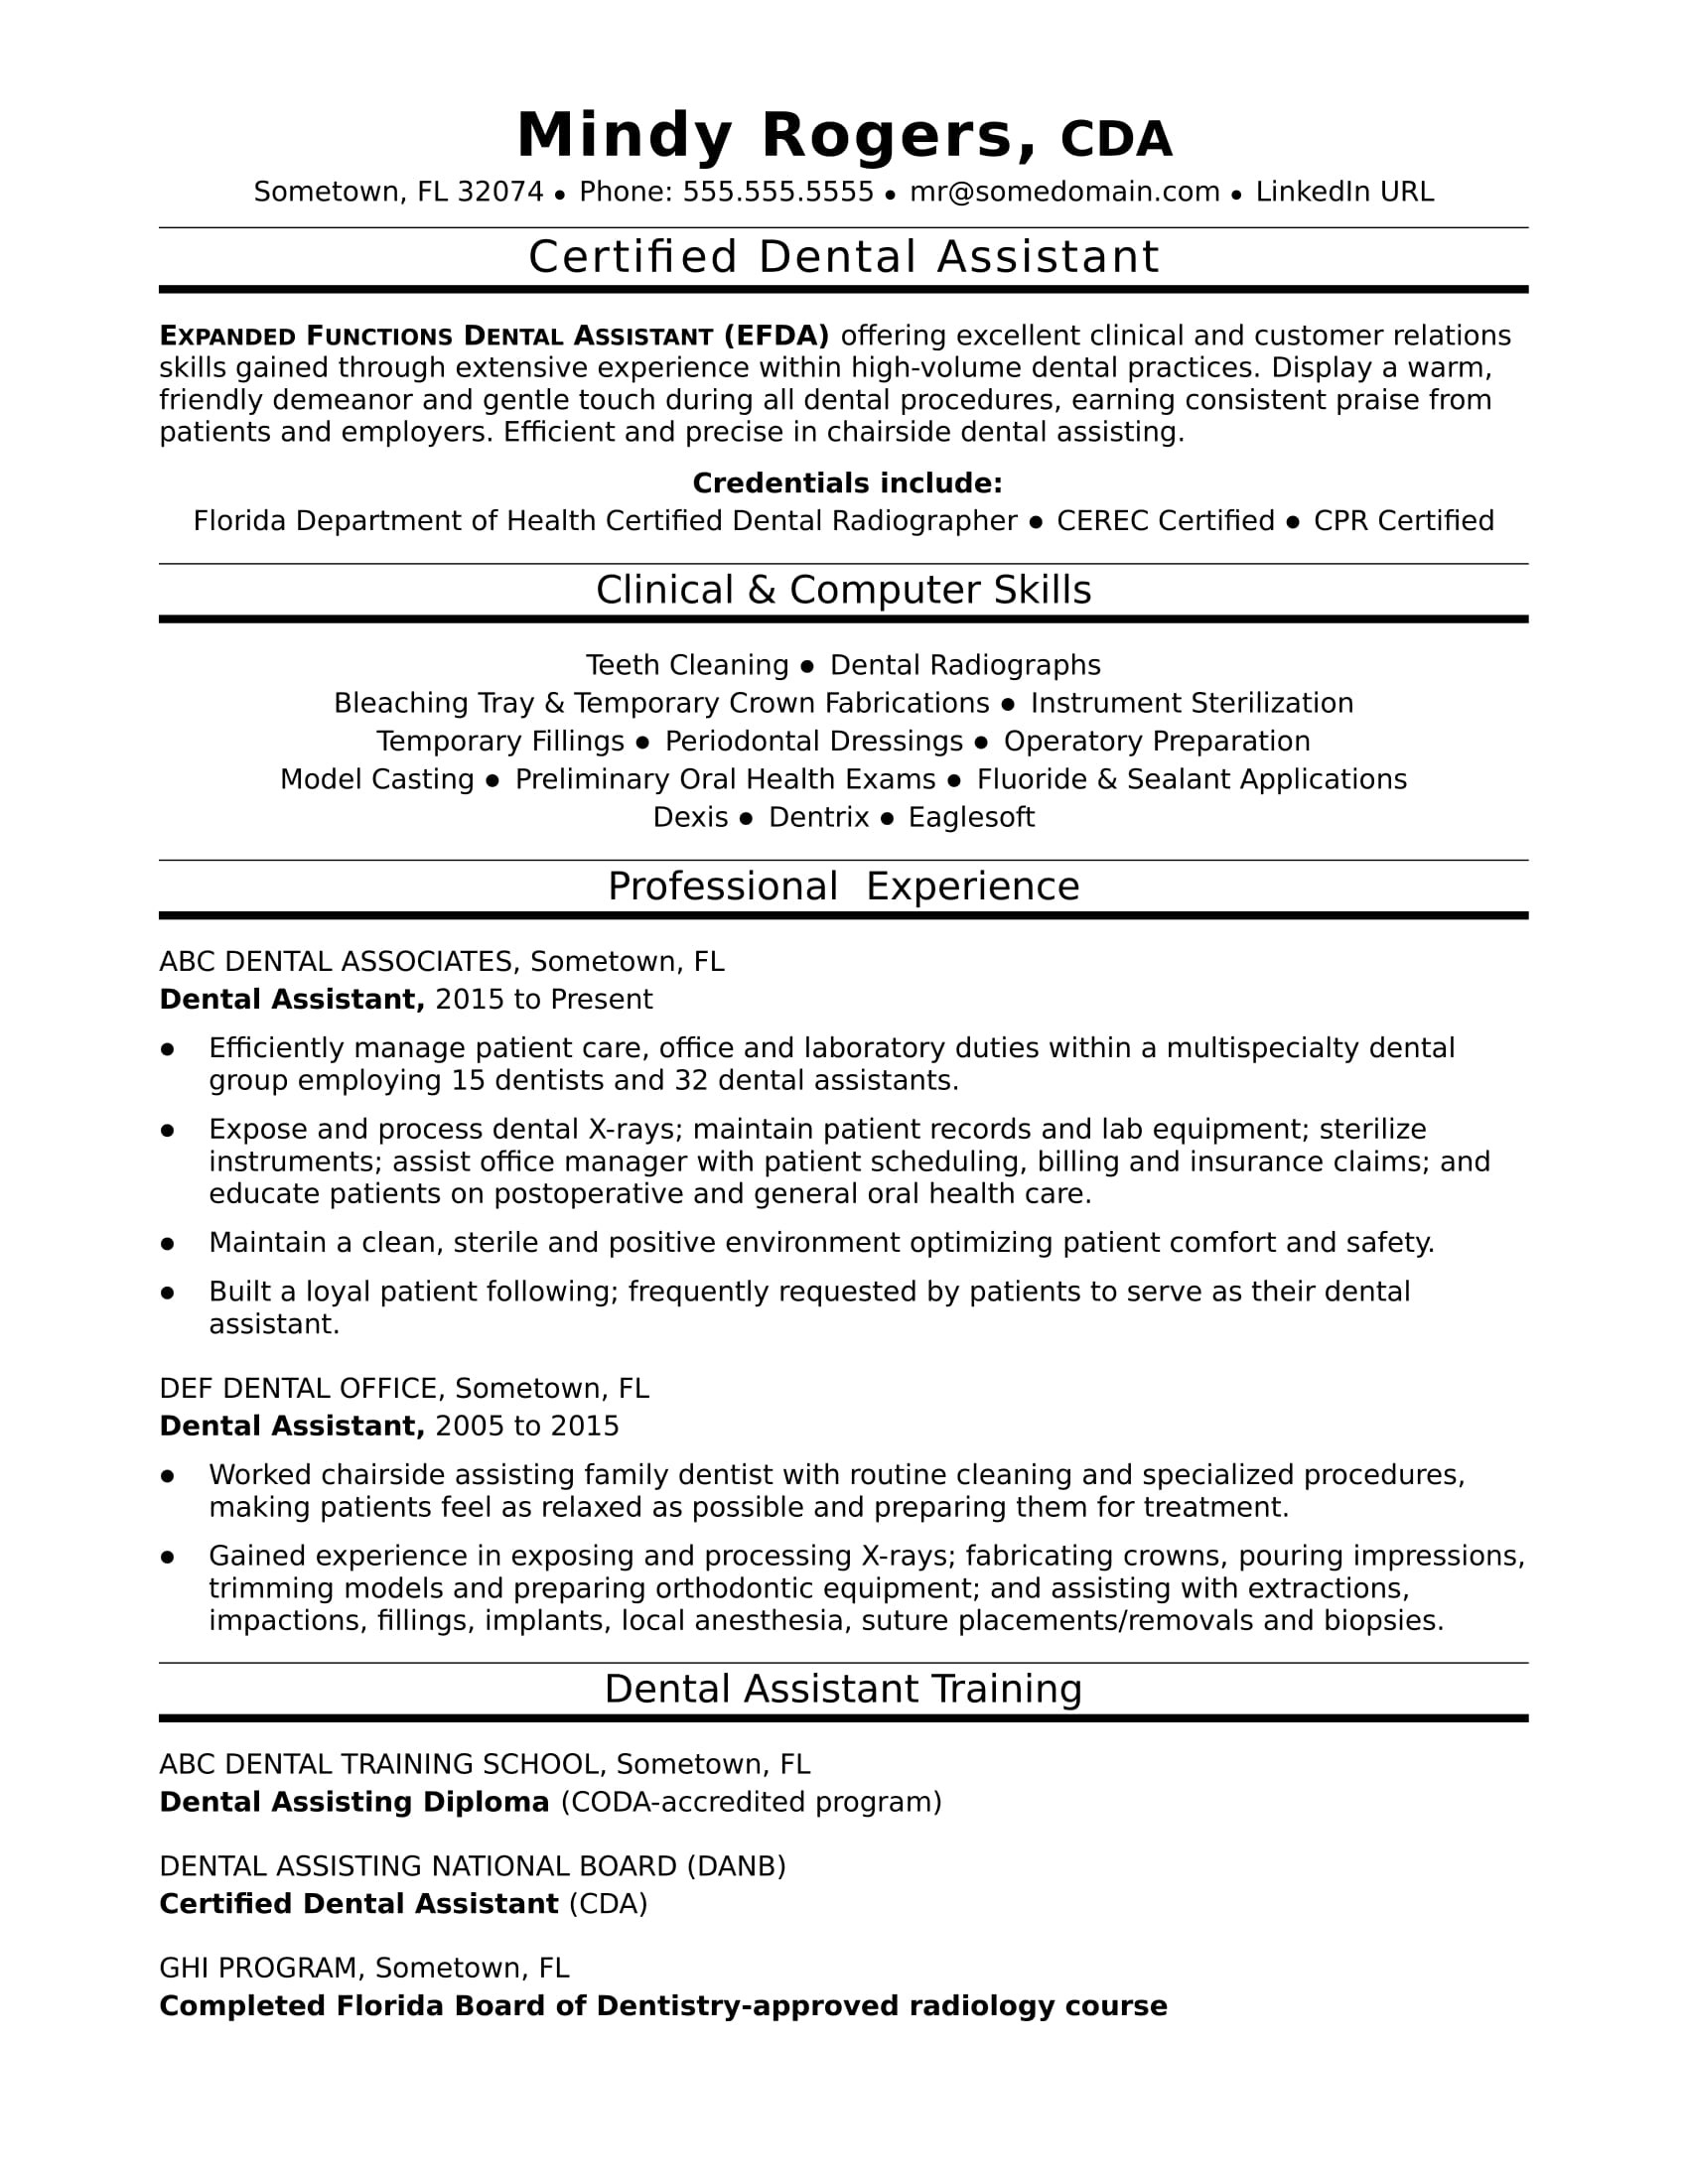 Sample Of Dental assistant Resume with No Experience Dental assistant Resume Sample Monster.com